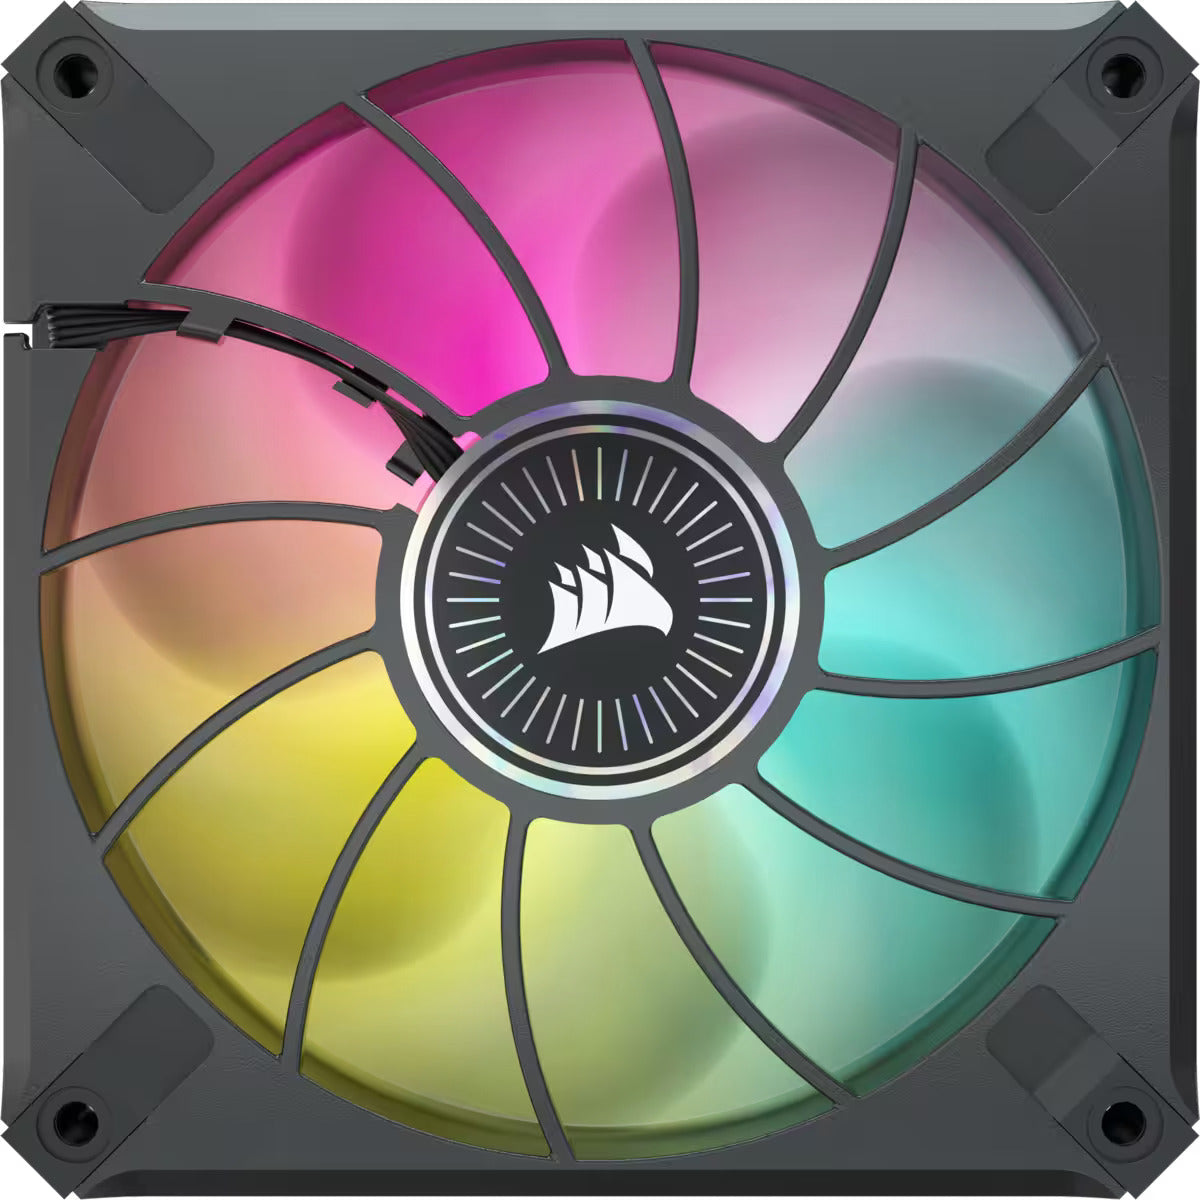 CORSAIR ML120 Elite Premium iCUE RGB 3pcs 120mm Desktop System Unit PWM Cooling Fan Pack with 2000 RPM Fan Speed and Magnetic Levitating Blade for PC Computer (Black, White) | CO-9050113-WW CO-9050117-WW